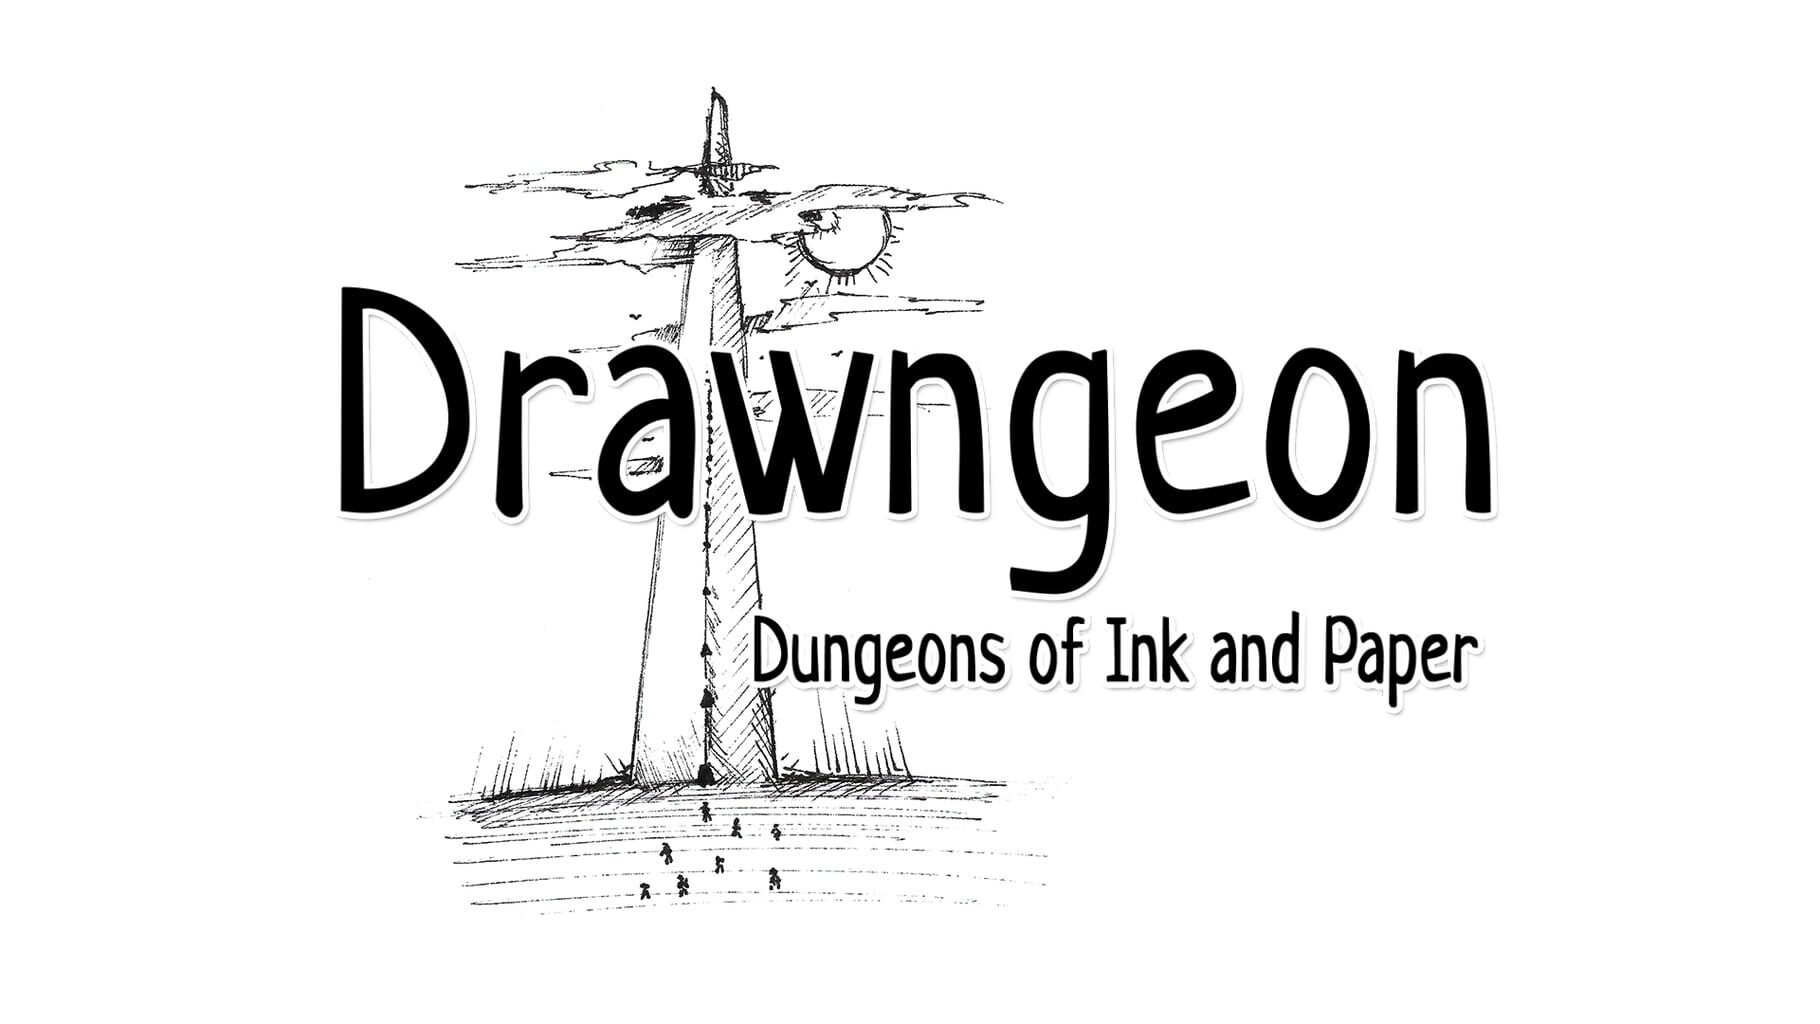 Drawngeon: Dungeons of Ink and Paper artwork